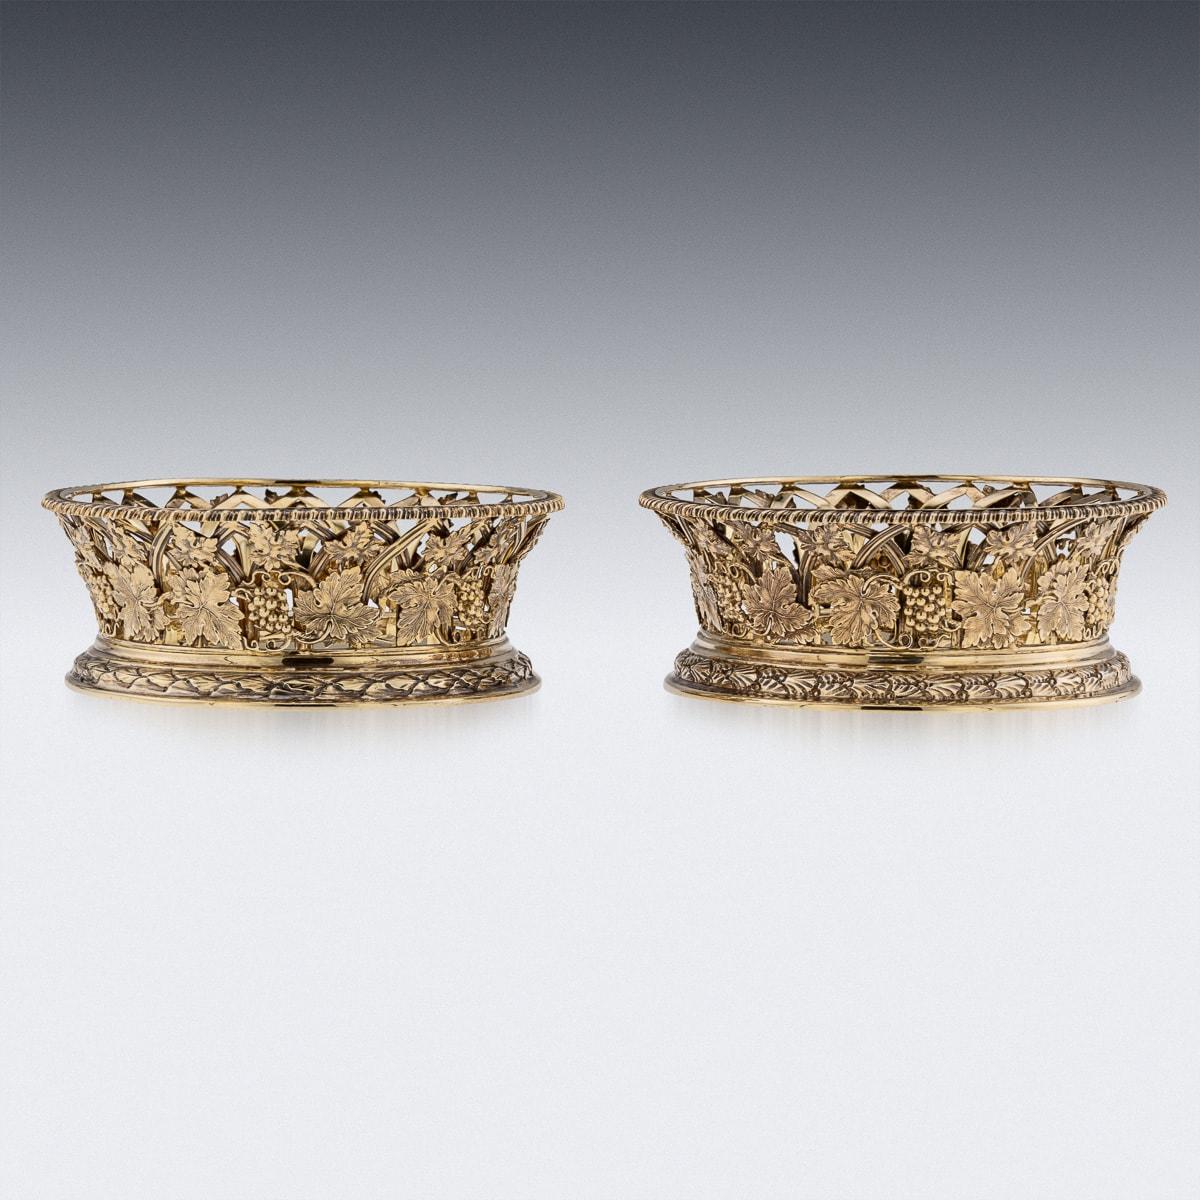 Early 20th Century Antique 20th Century Edwardian Silver Gilt Pair Of Wine Coasters, London c.1904 For Sale